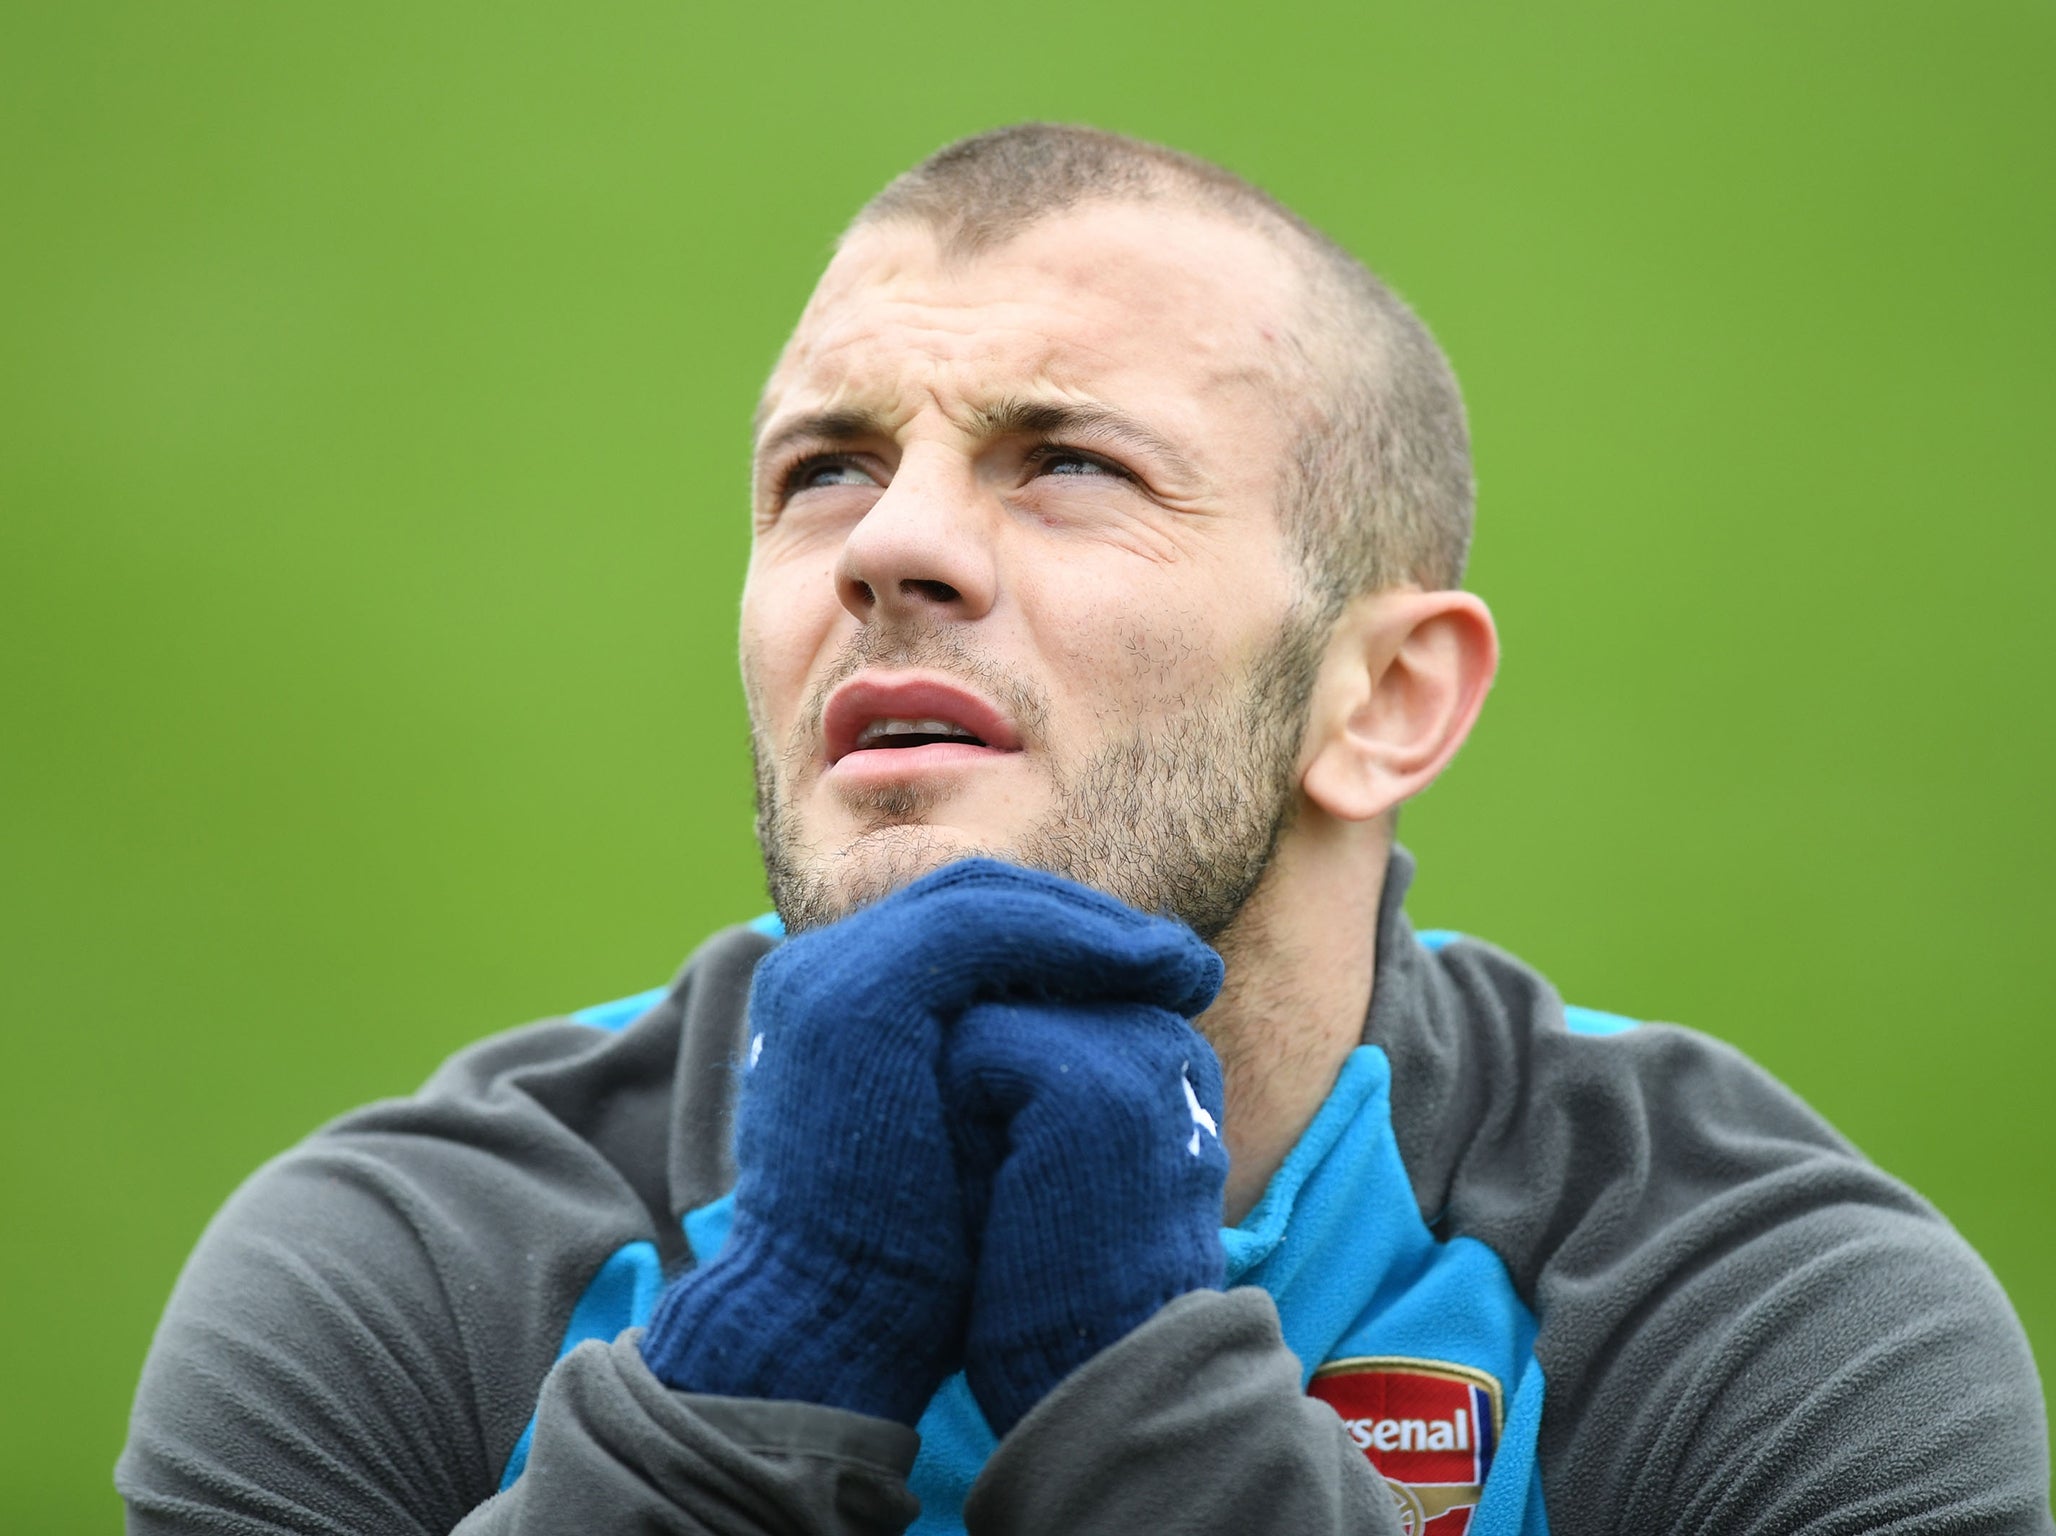 Arsenal come up against West Ham&apos;s new protagonist Jack Wilshere, but for how long will the respect last?